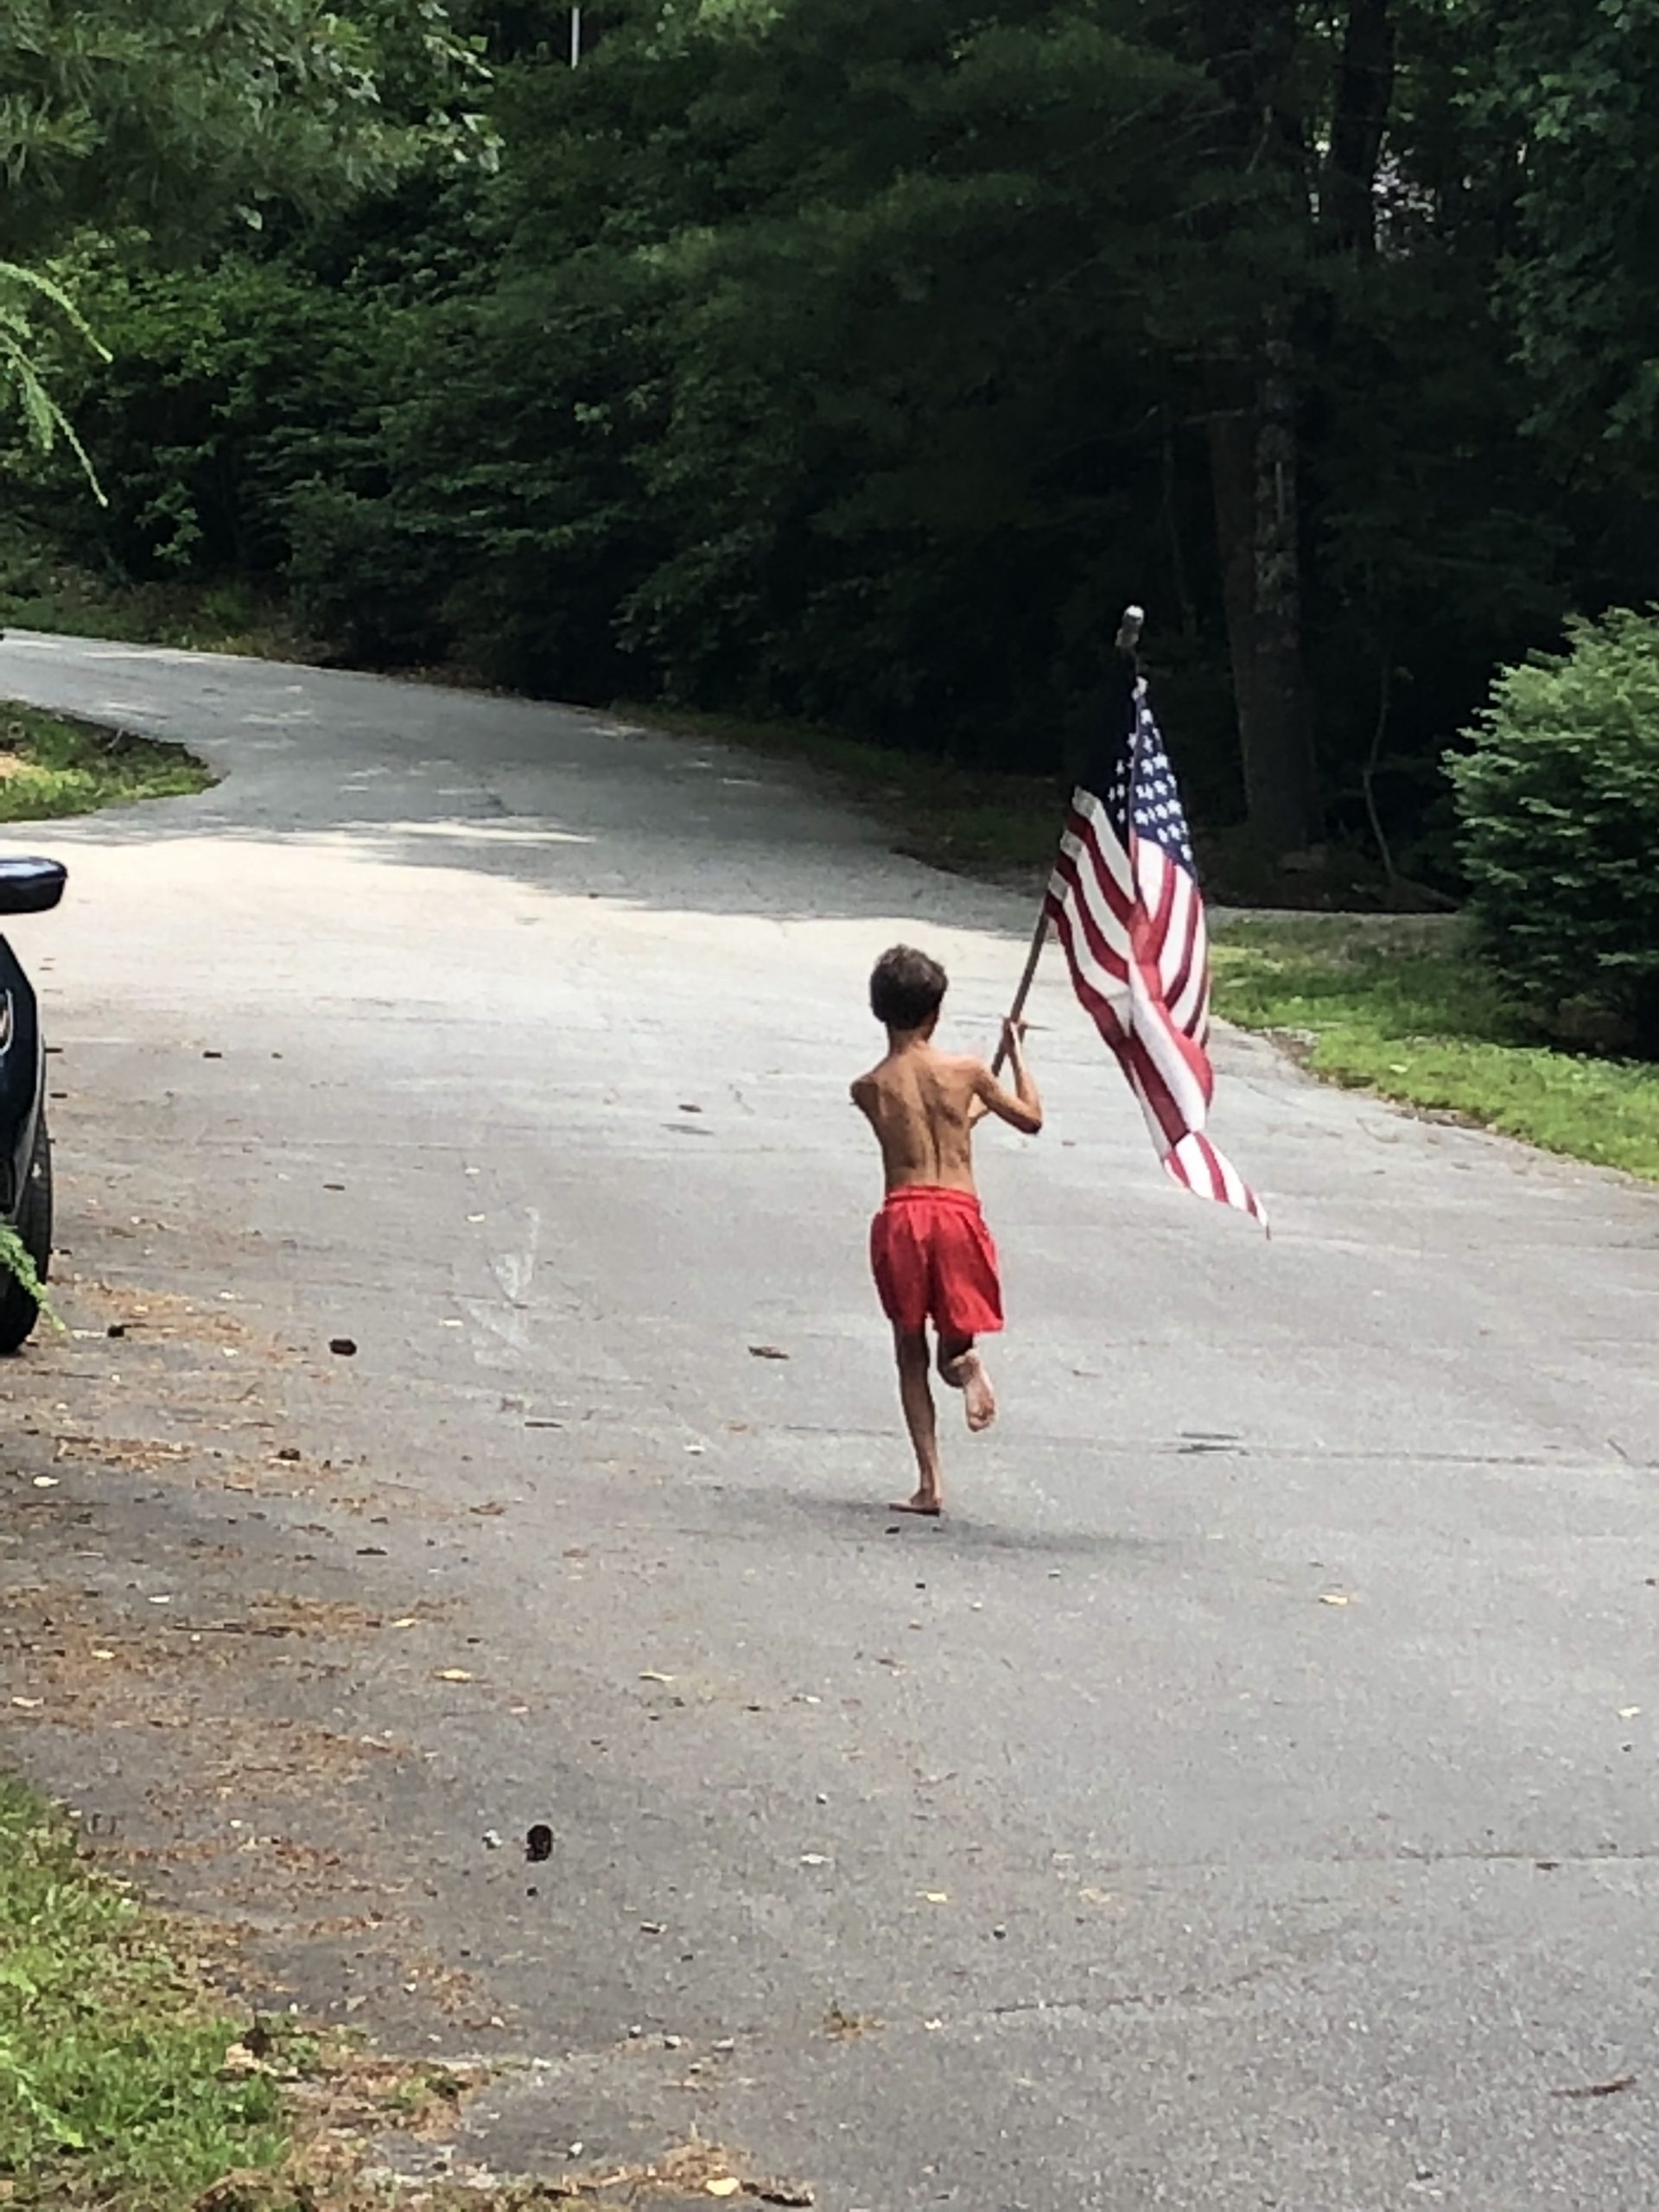 Summer holidays are a big deal at Caesar’s Head, particularly the Fourth of July, which is celebrated with a community-wide barbecue and golf cart parade. James Hicks loves to carry the flag in front of the parade!